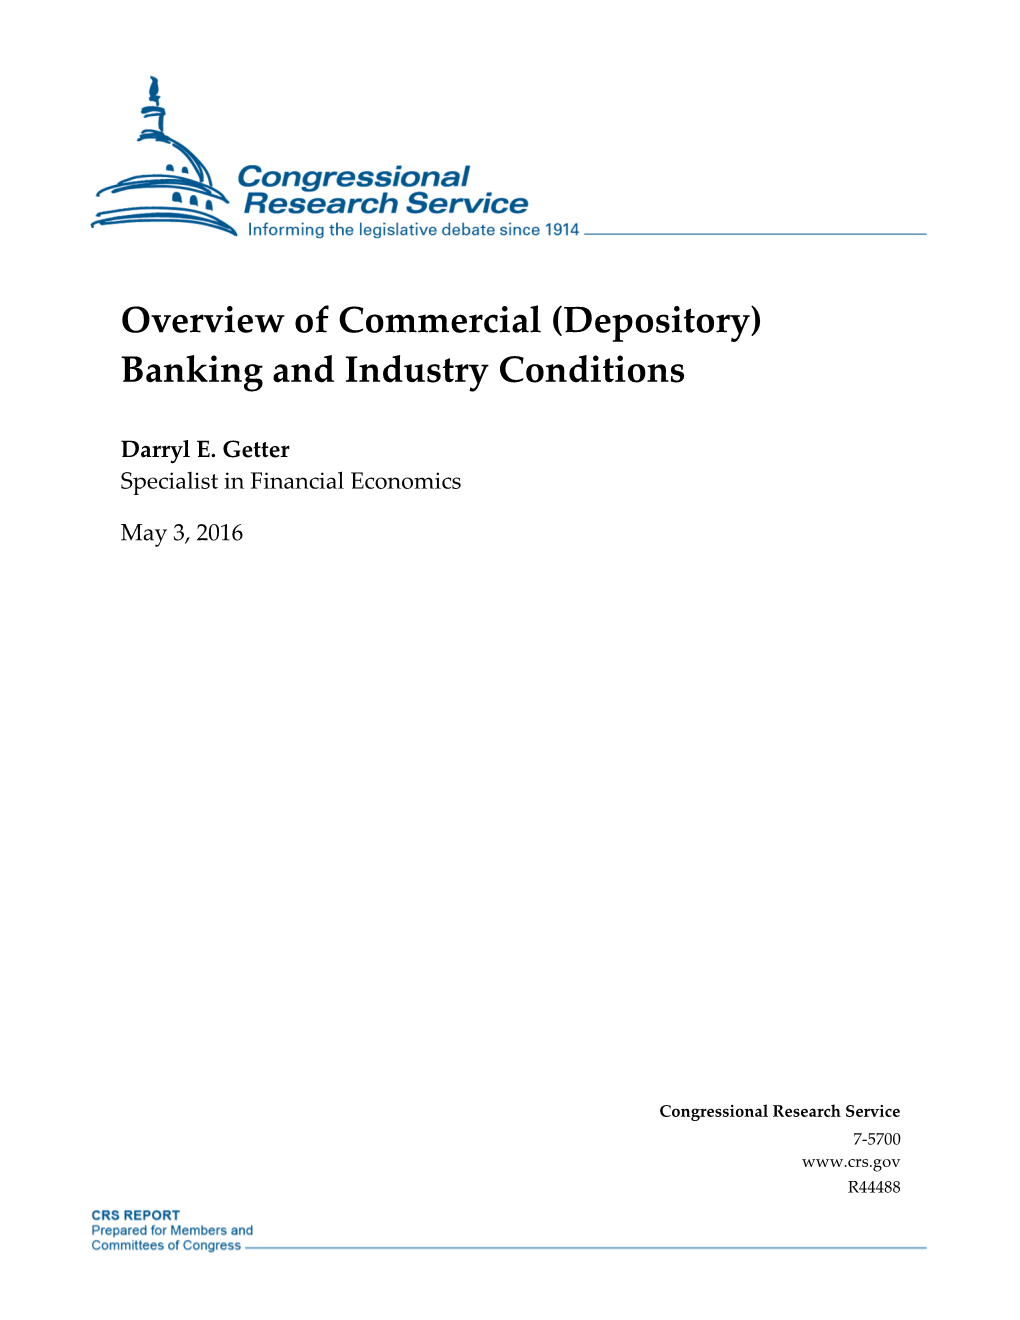 Overview of Commercial (Depository) Banking and Industry Conditions